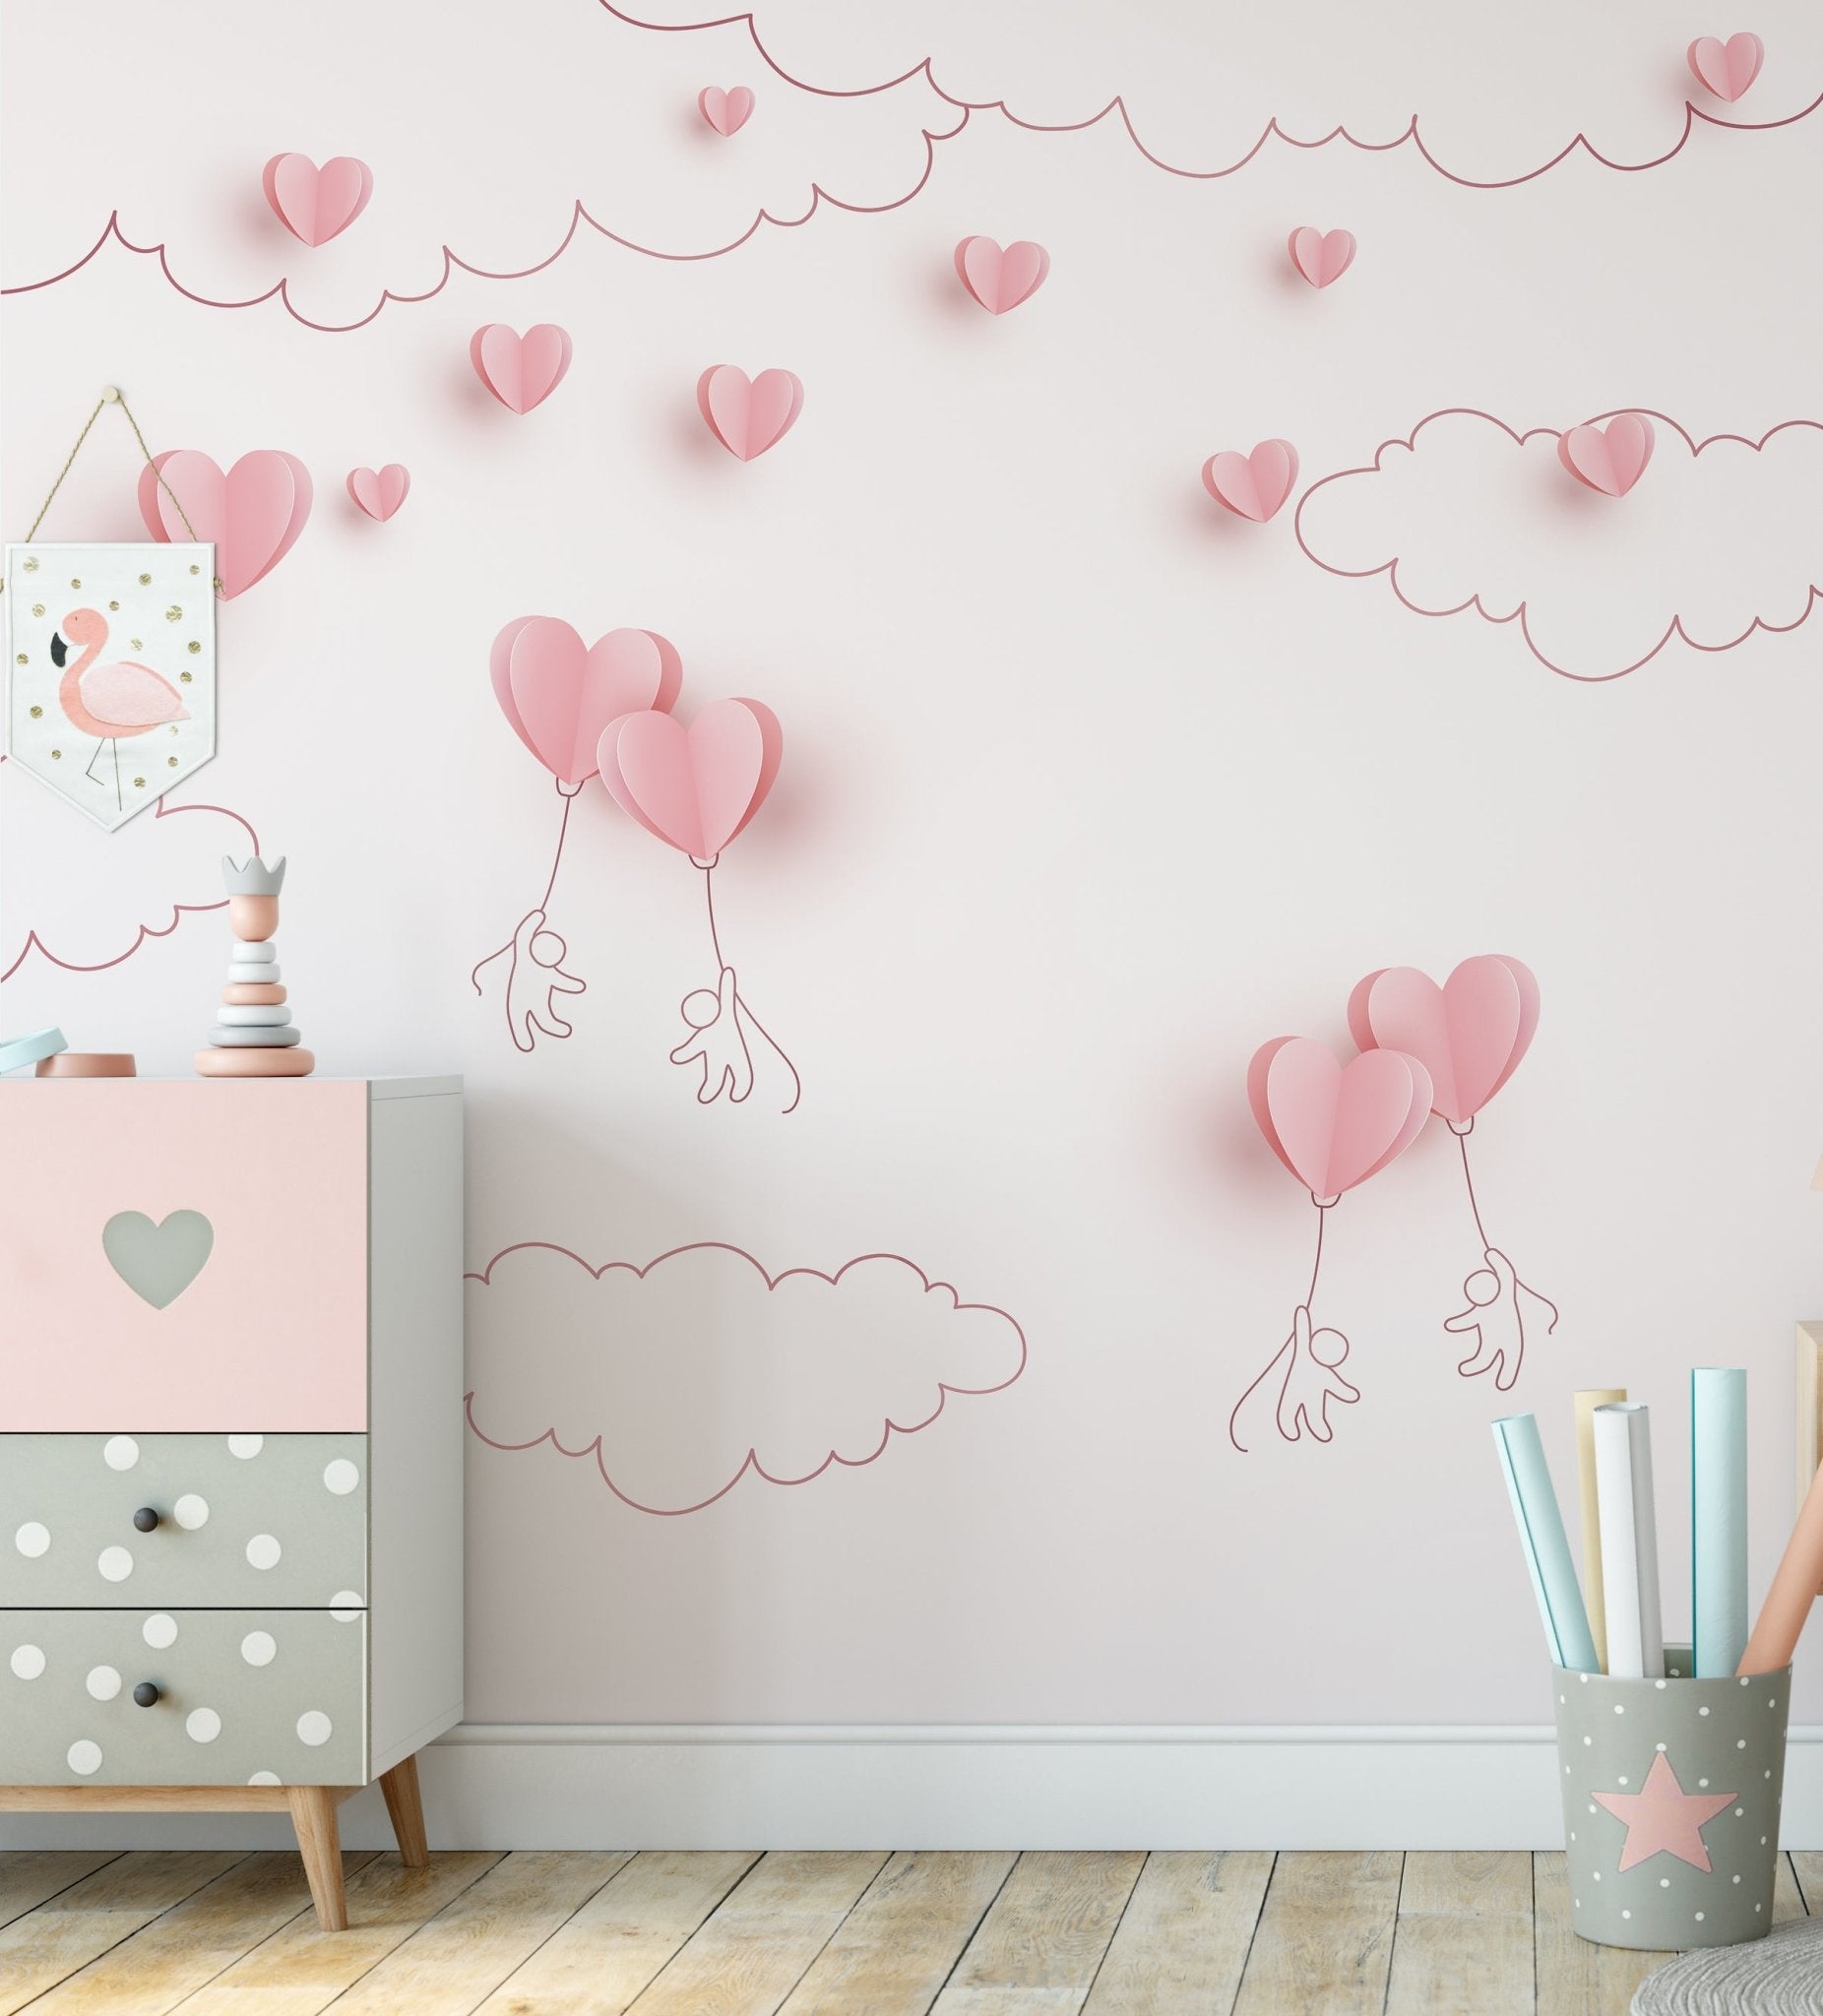 Heart balloon with drawing hanging - OCP TINY THINGS